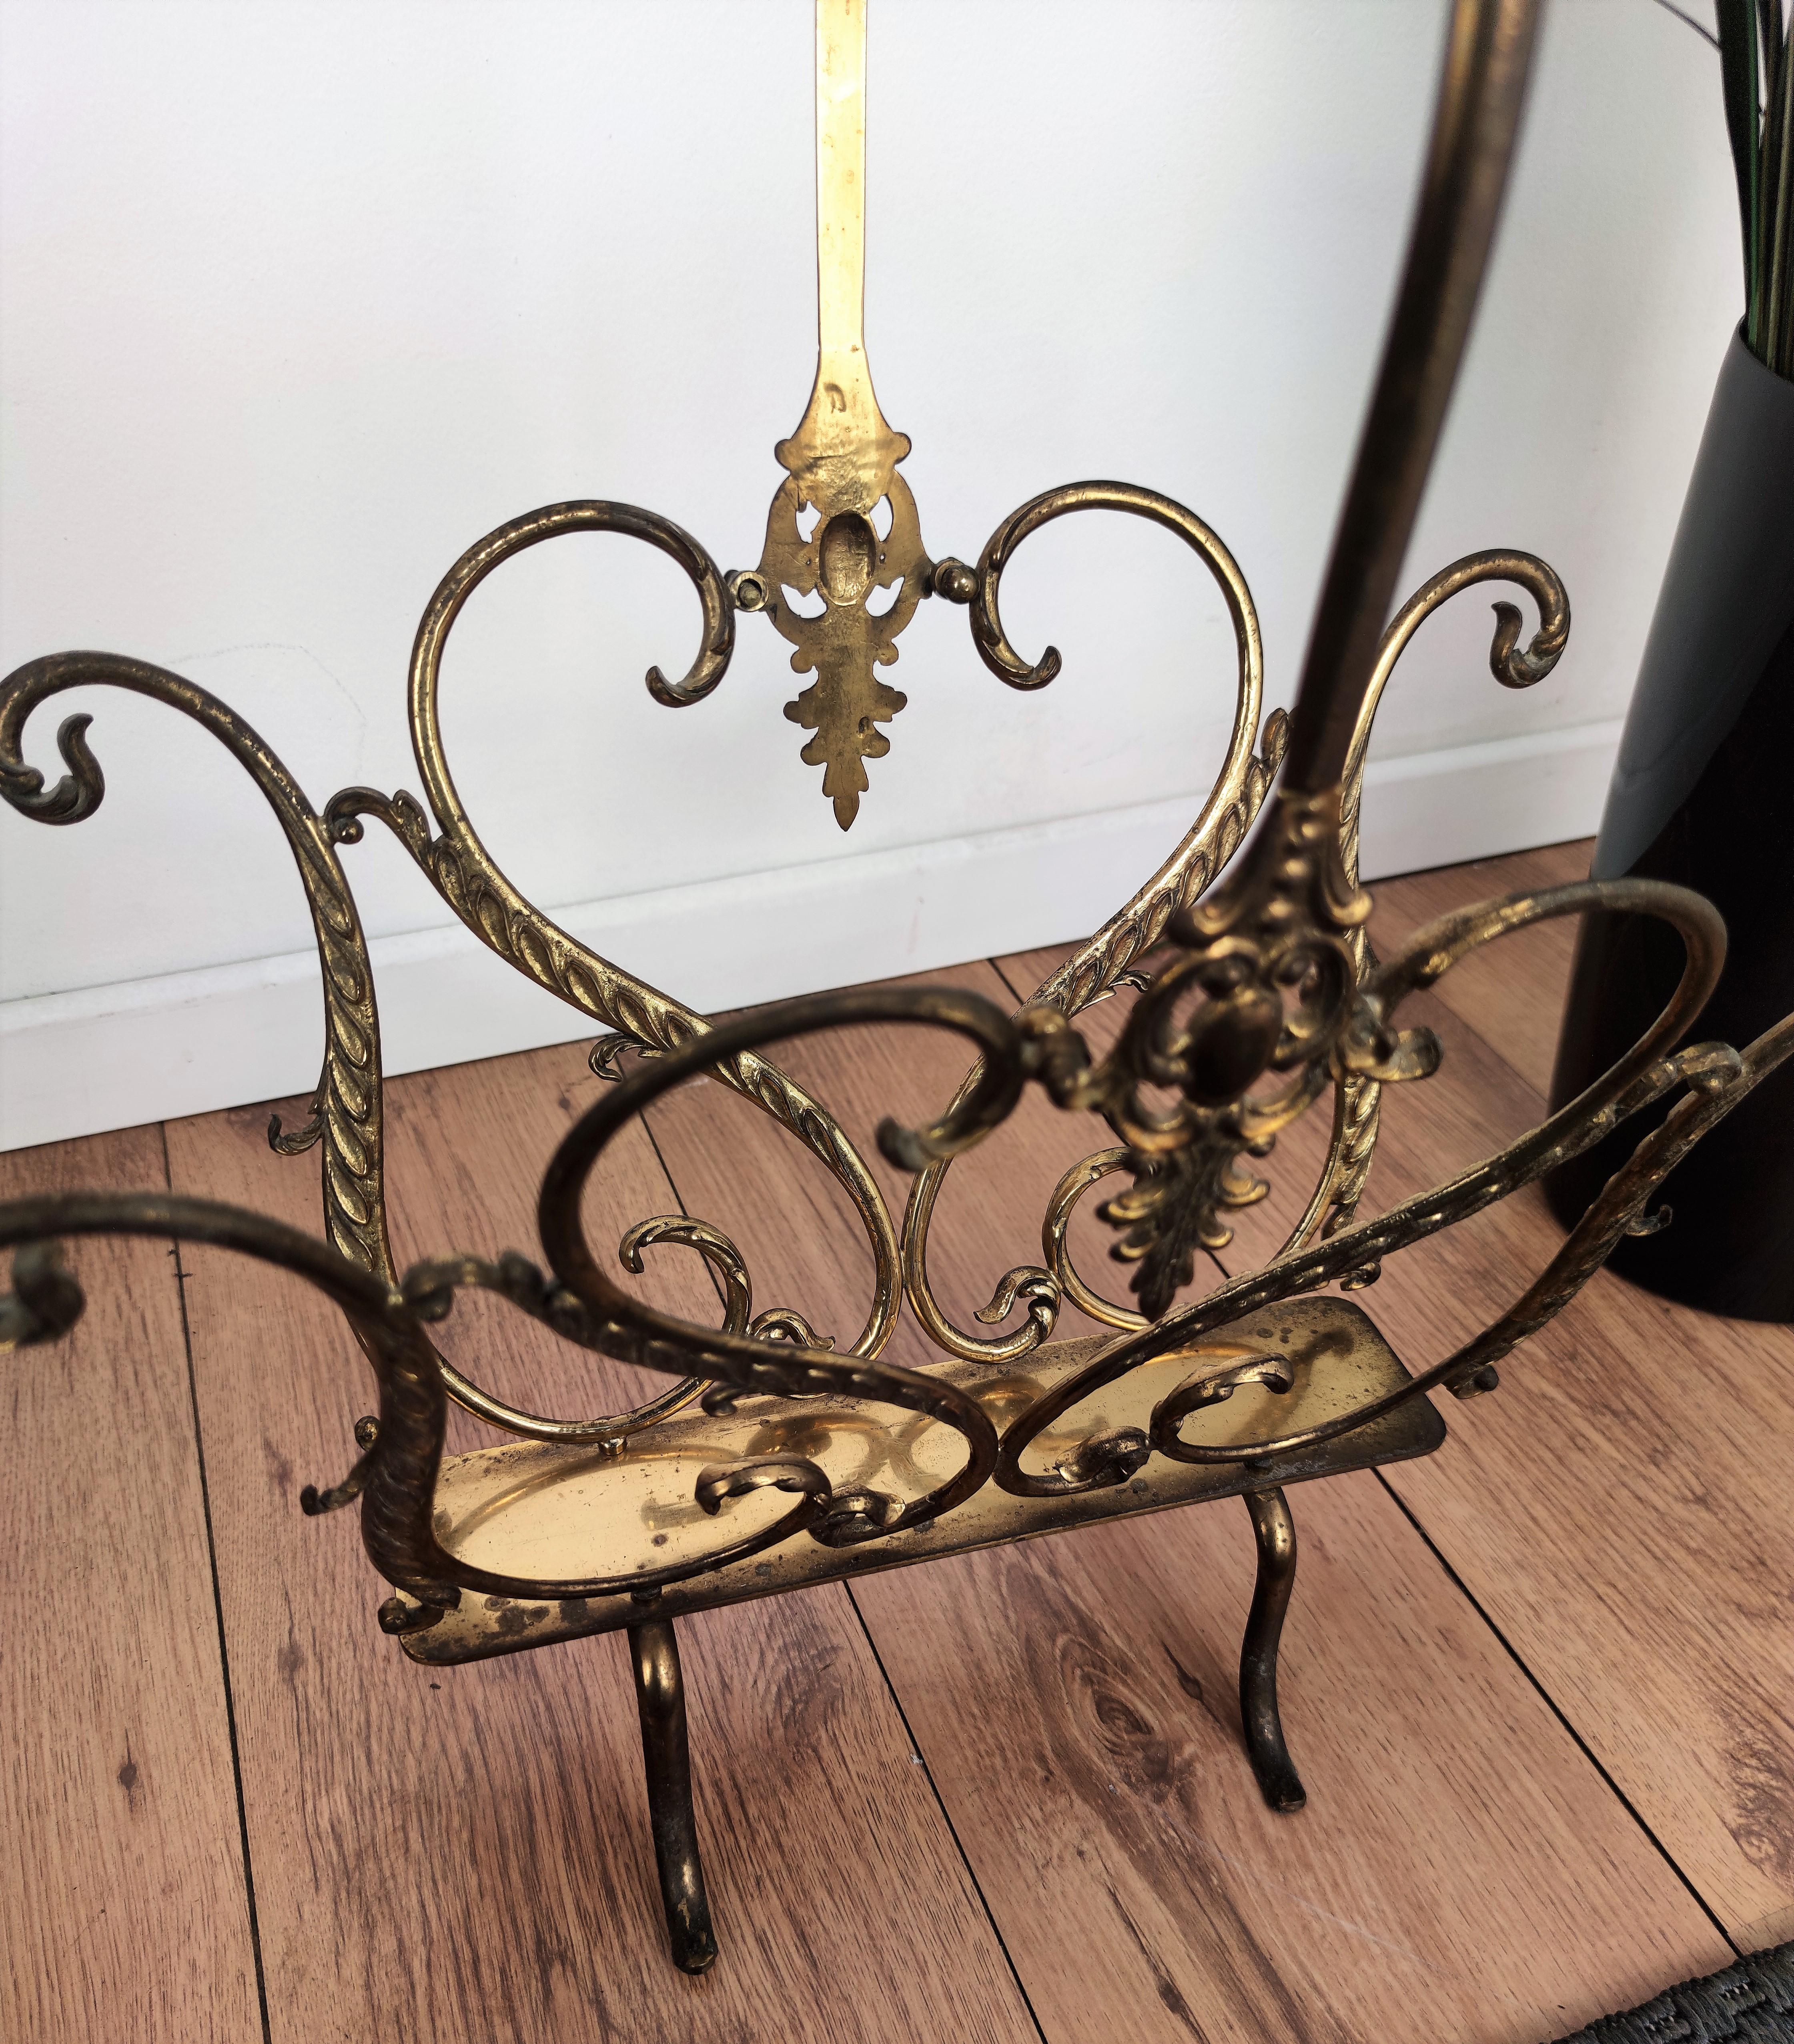 20th Century 1950s Italian Midcentury Neoclassical Regency Brass Magazine Stand or Rack For Sale